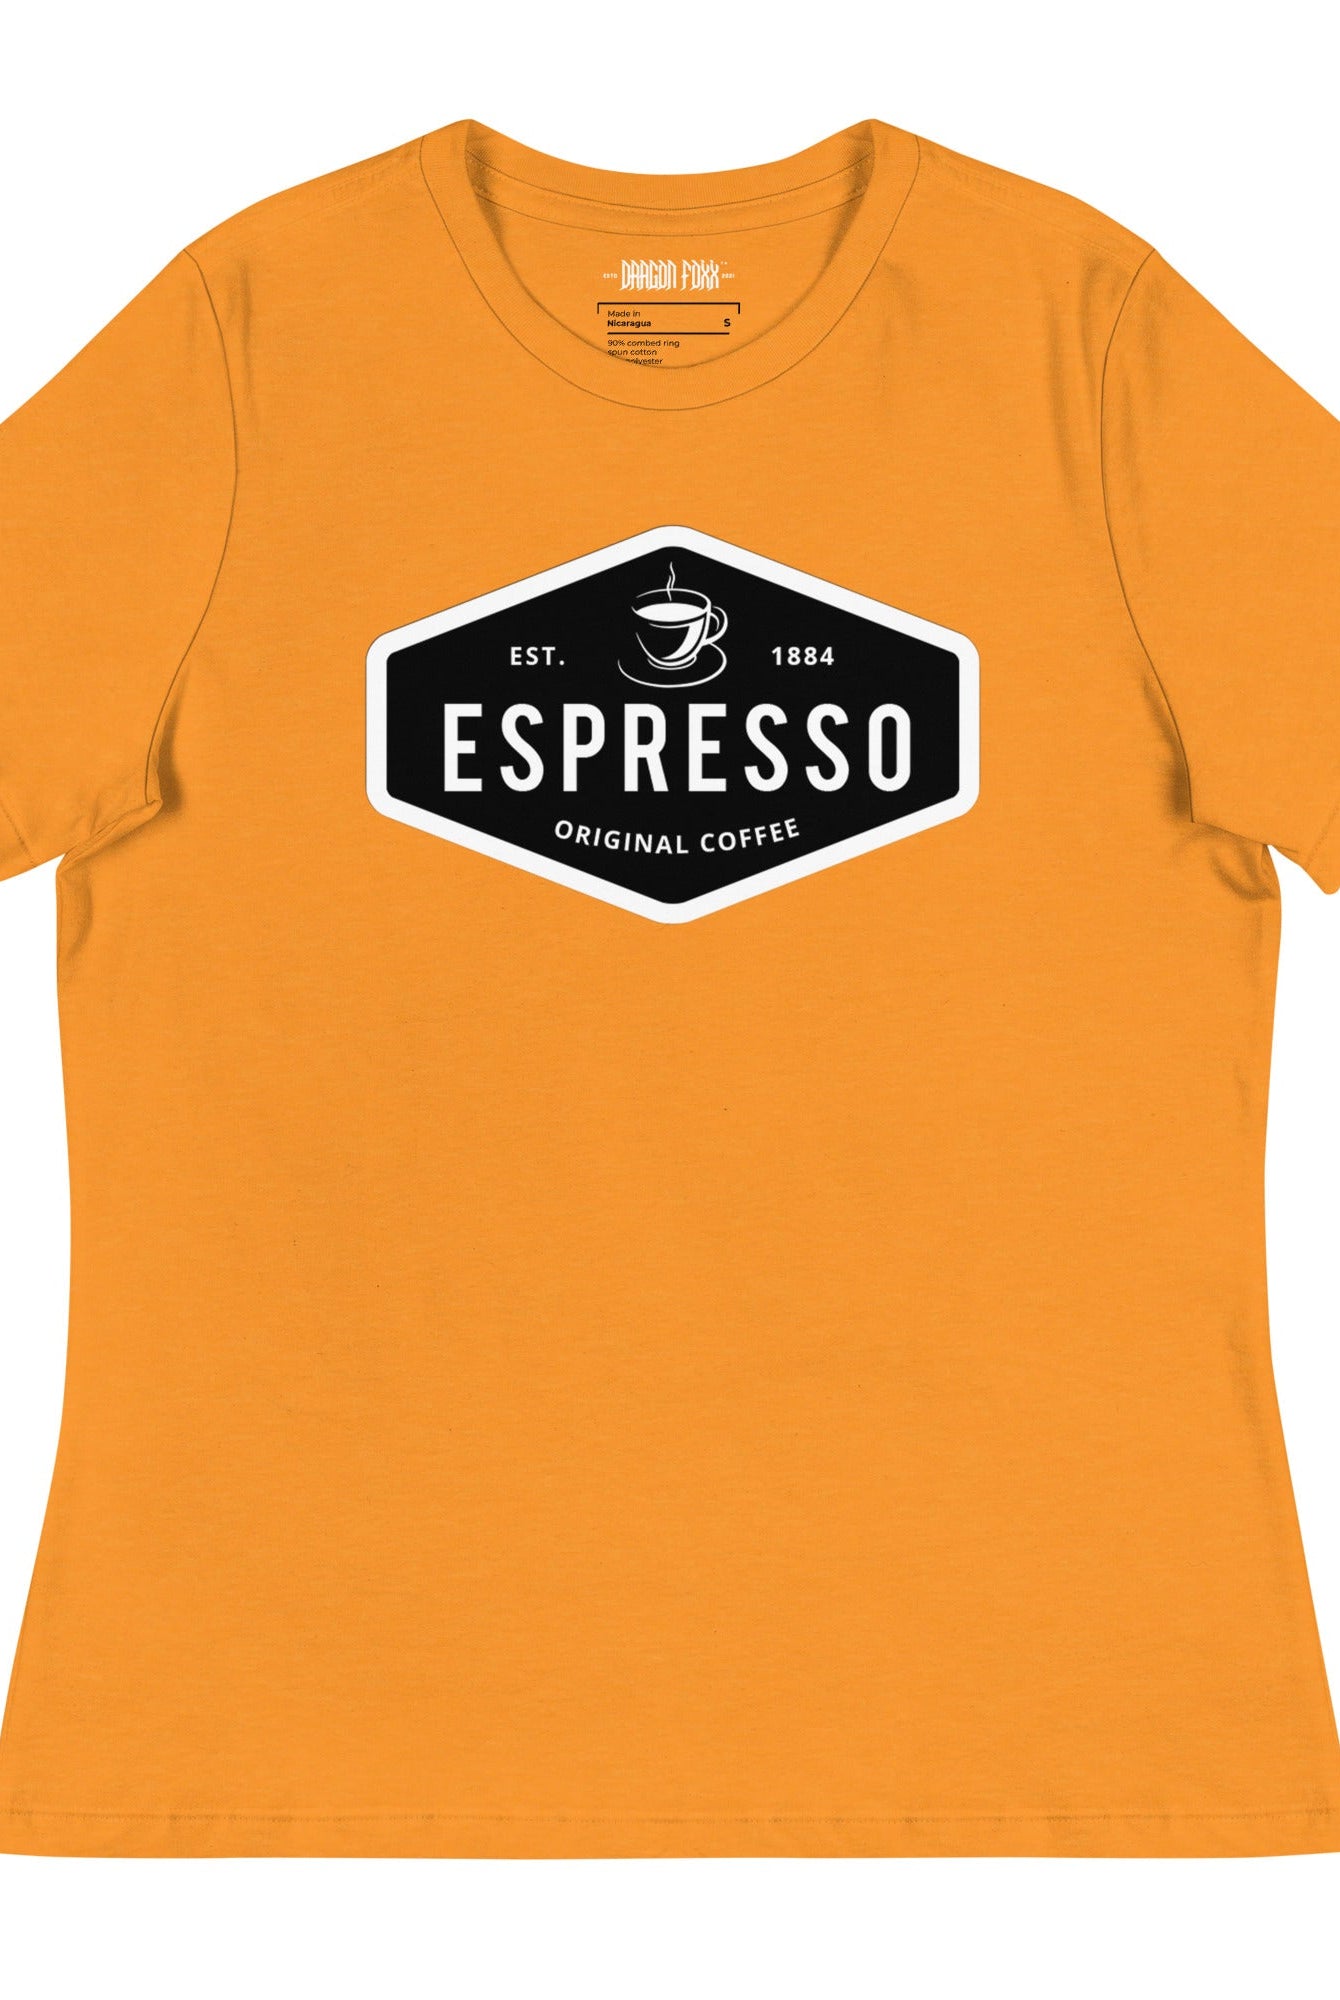 ESPRESSO - Women's Relaxed Fit Graphic T-Shirt in 16 Colors - Women's Relaxed Fit Graphic T-Shirt - DRAGON FOXX™ - 7218598_14263 - Heather Marmalade - S - Athletic Heather T-shirt - Berry T-shirt - Black T-shirt